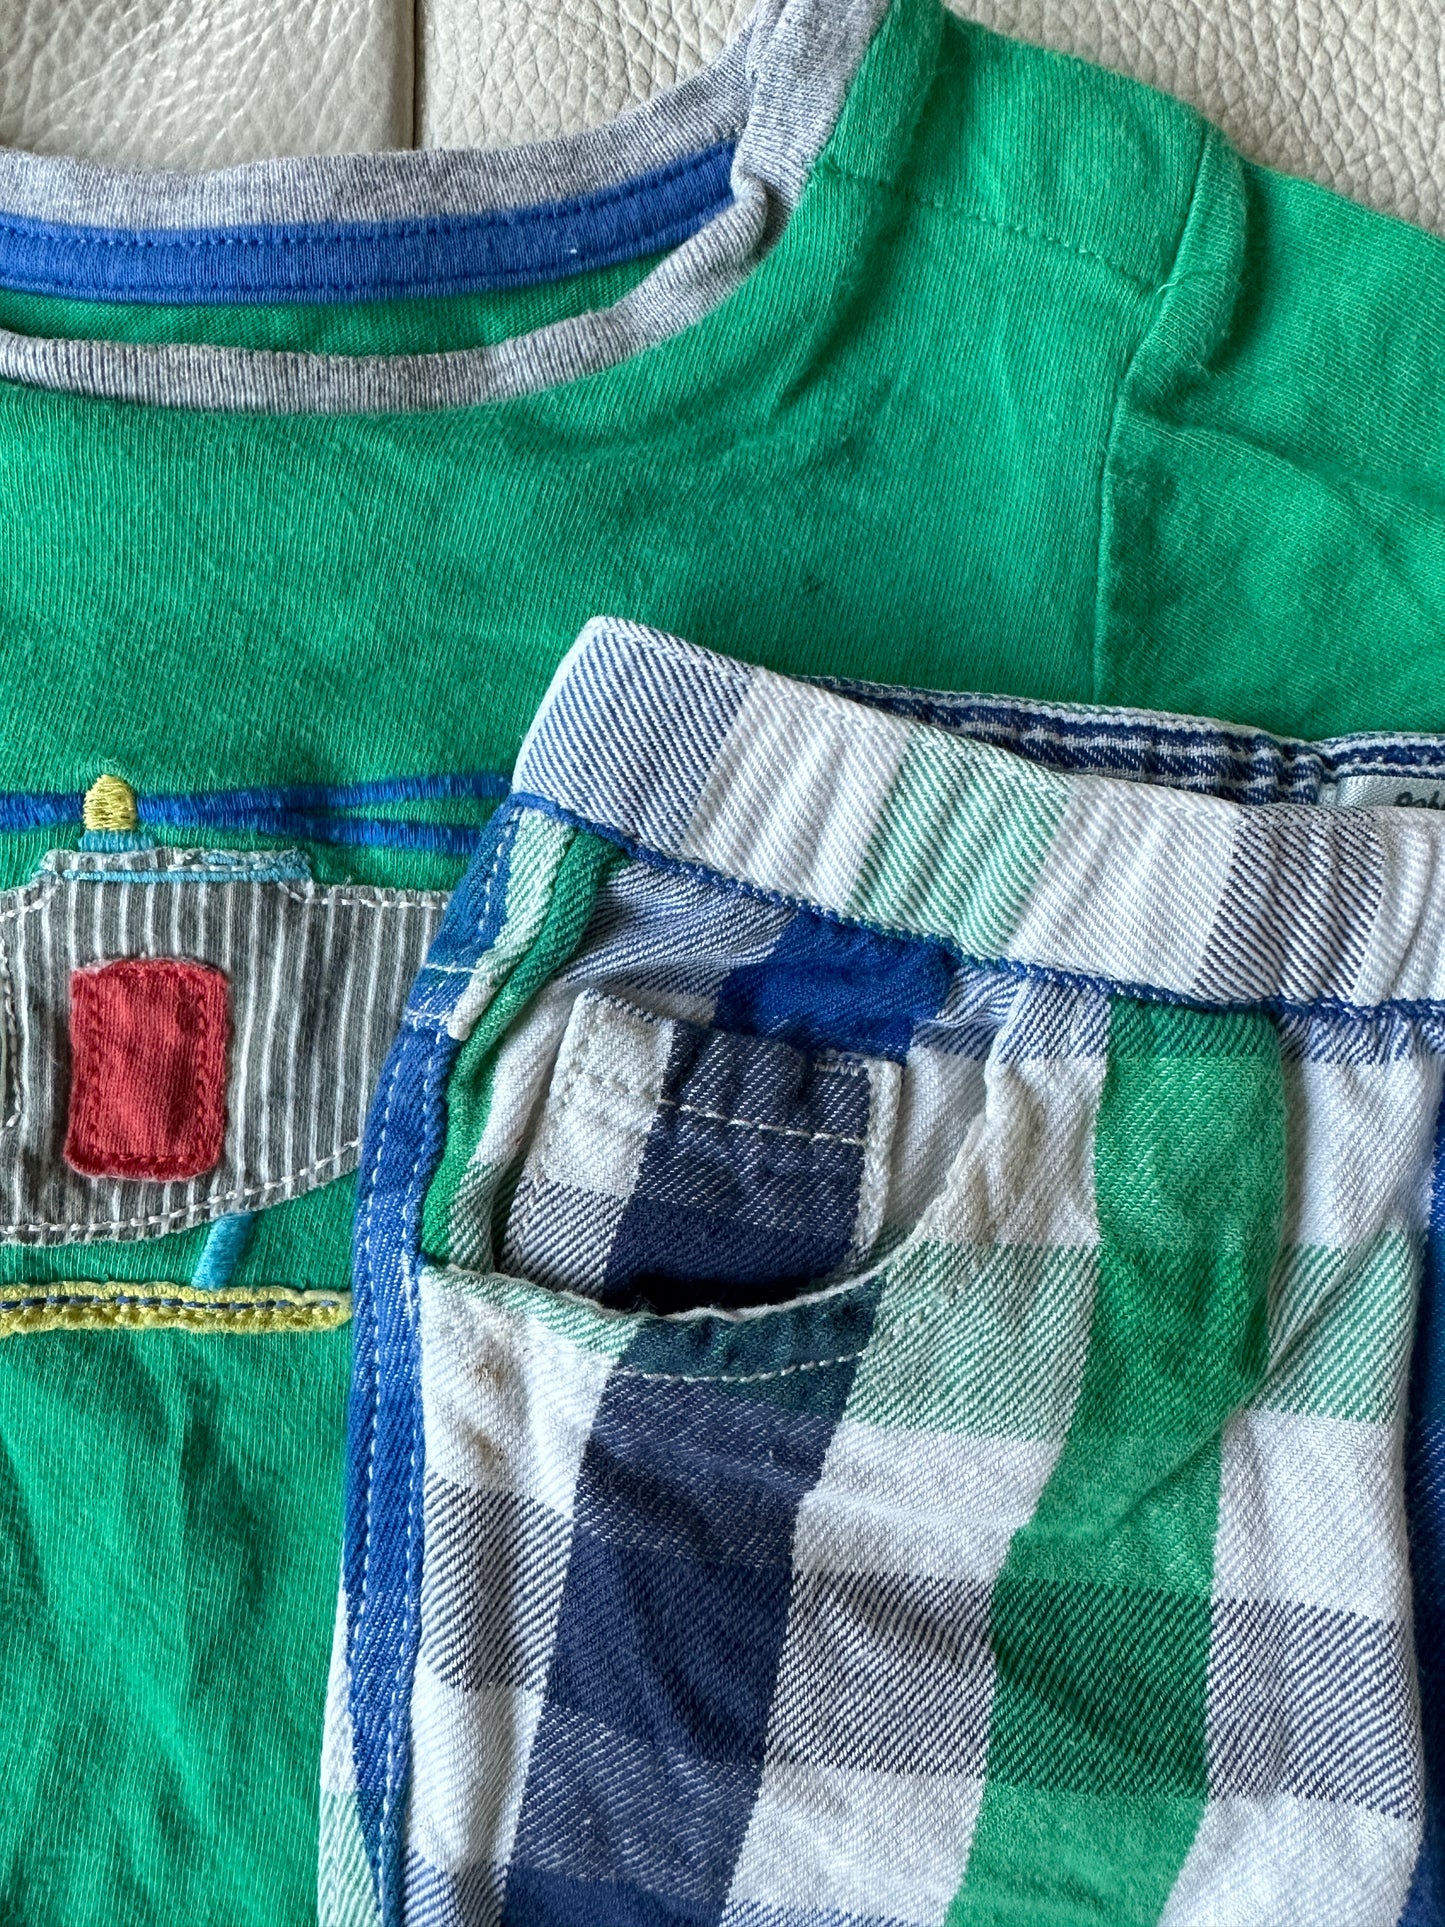 Baby Boden 12-18 mo outfit